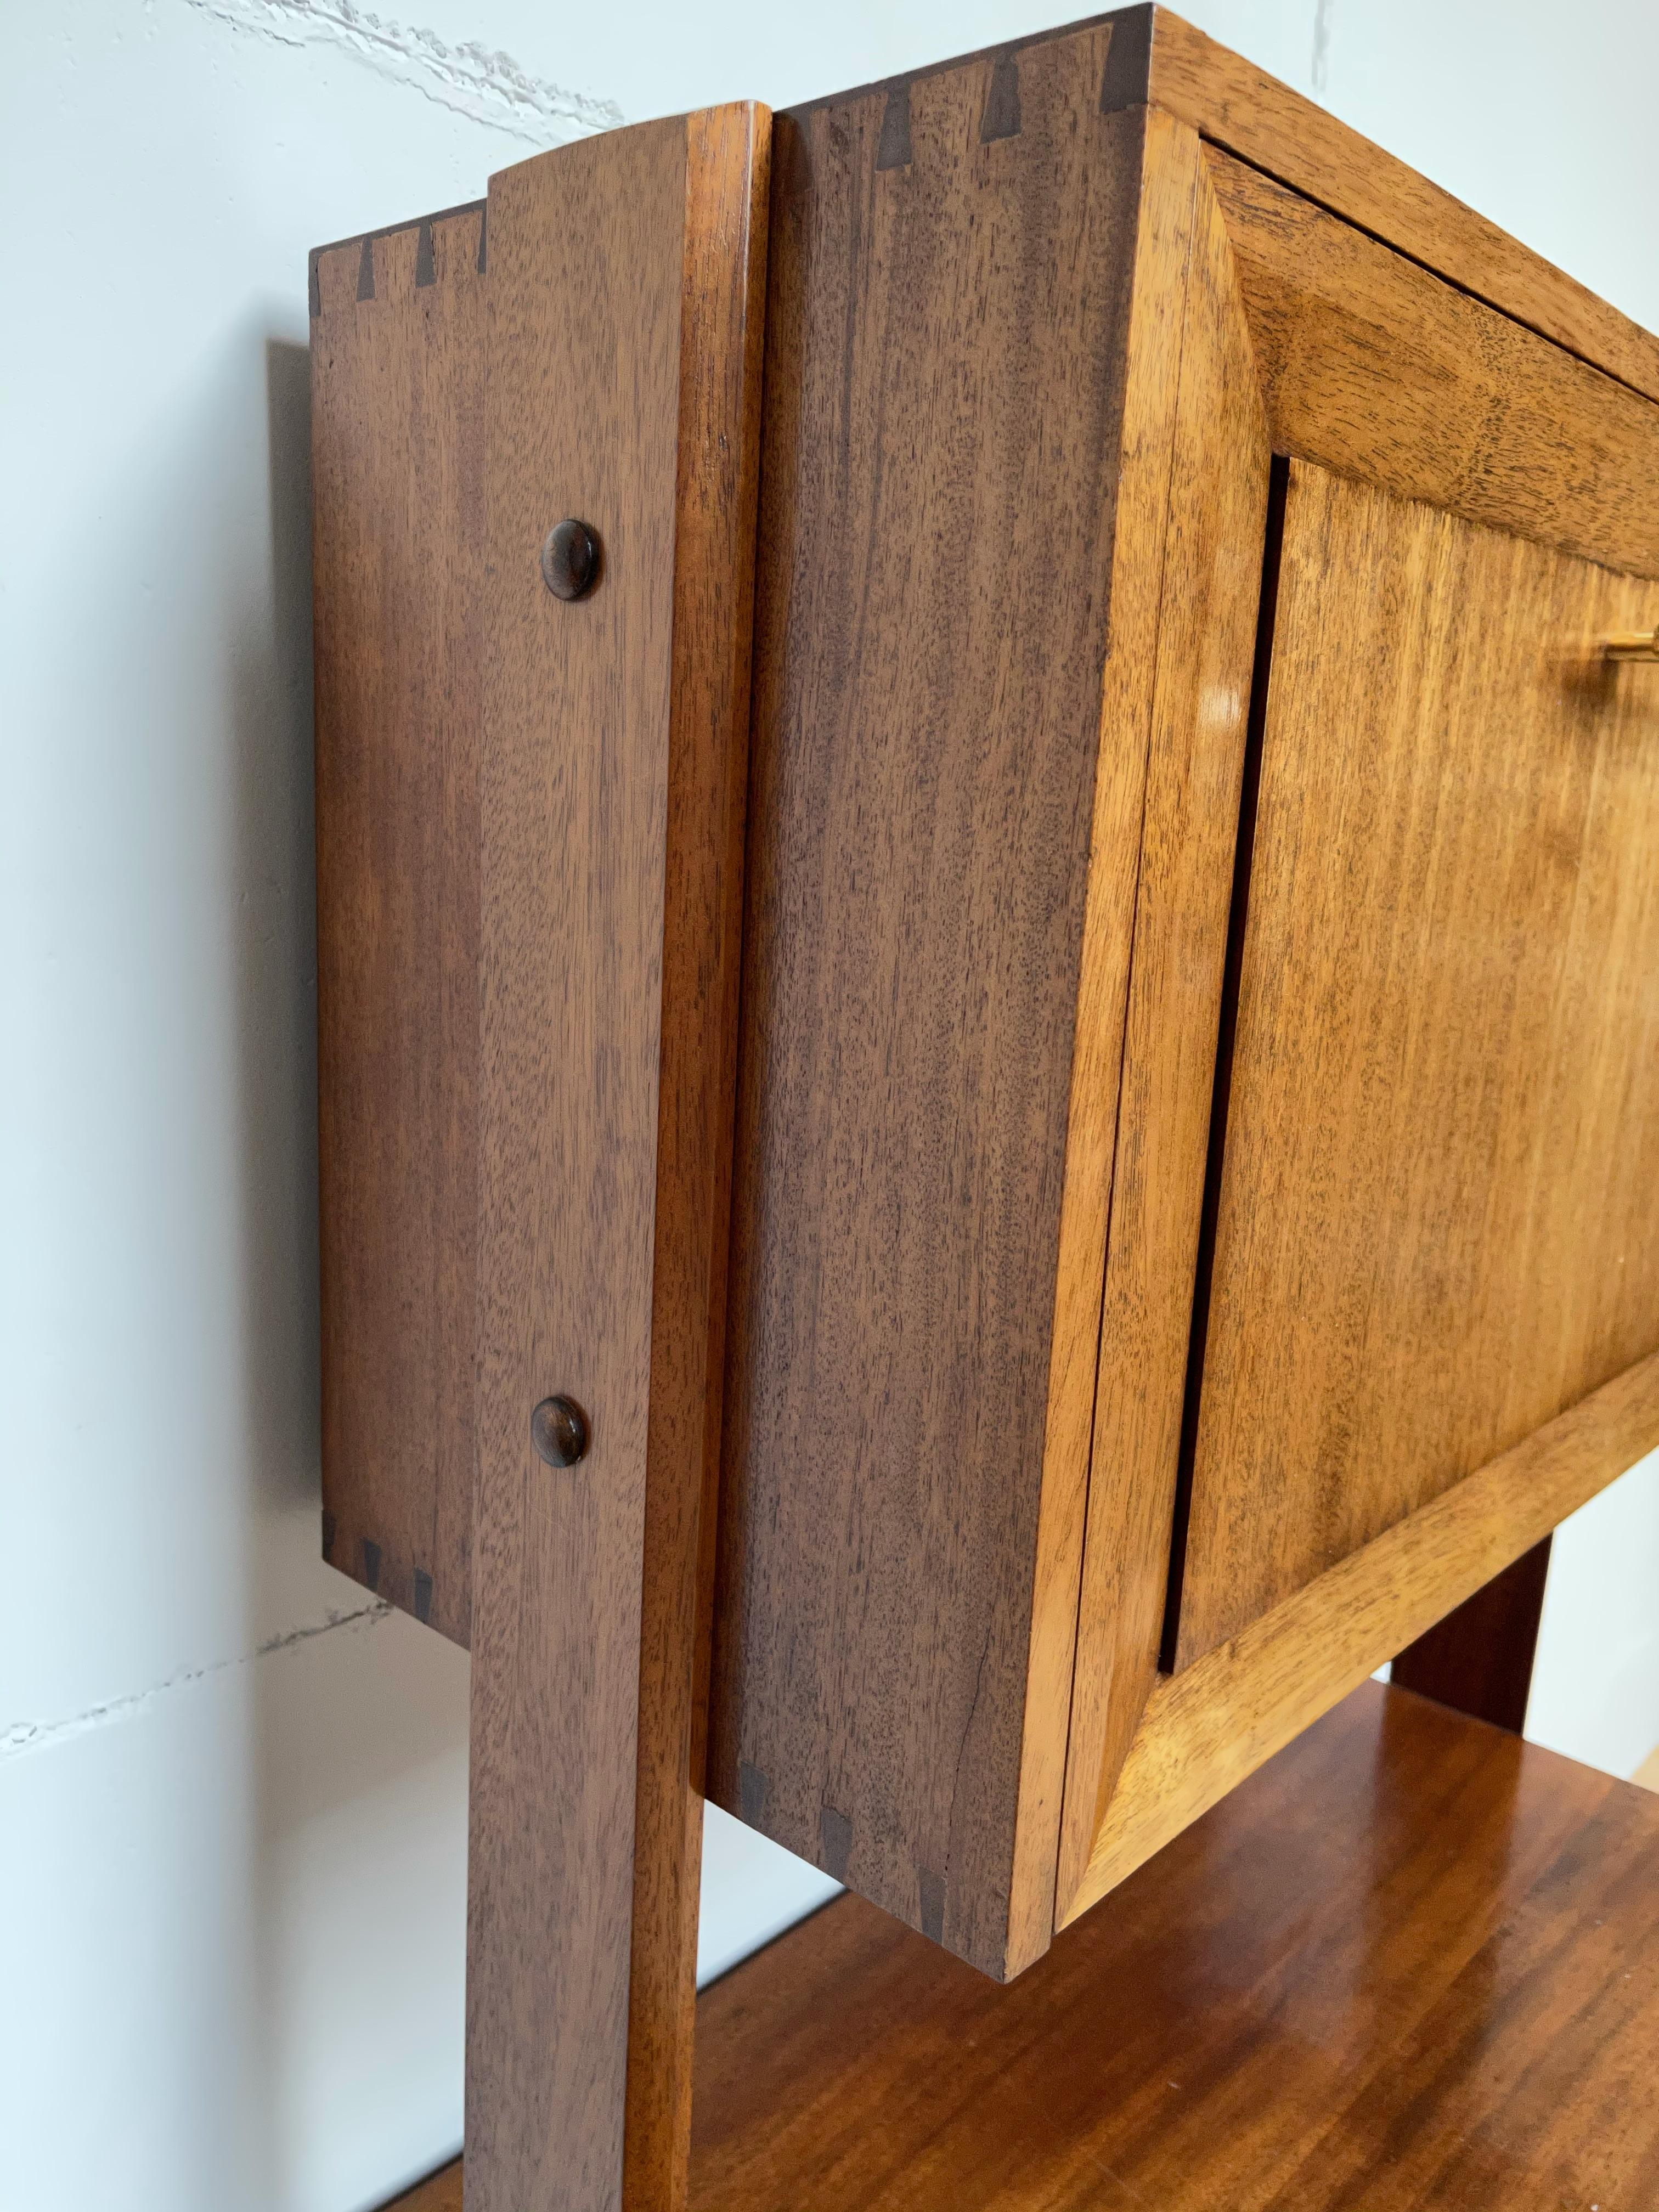 Great Quality Midcentury Modern Solid Teak Wood Drinks Cabinet or Dry Bar, 1960s For Sale 1